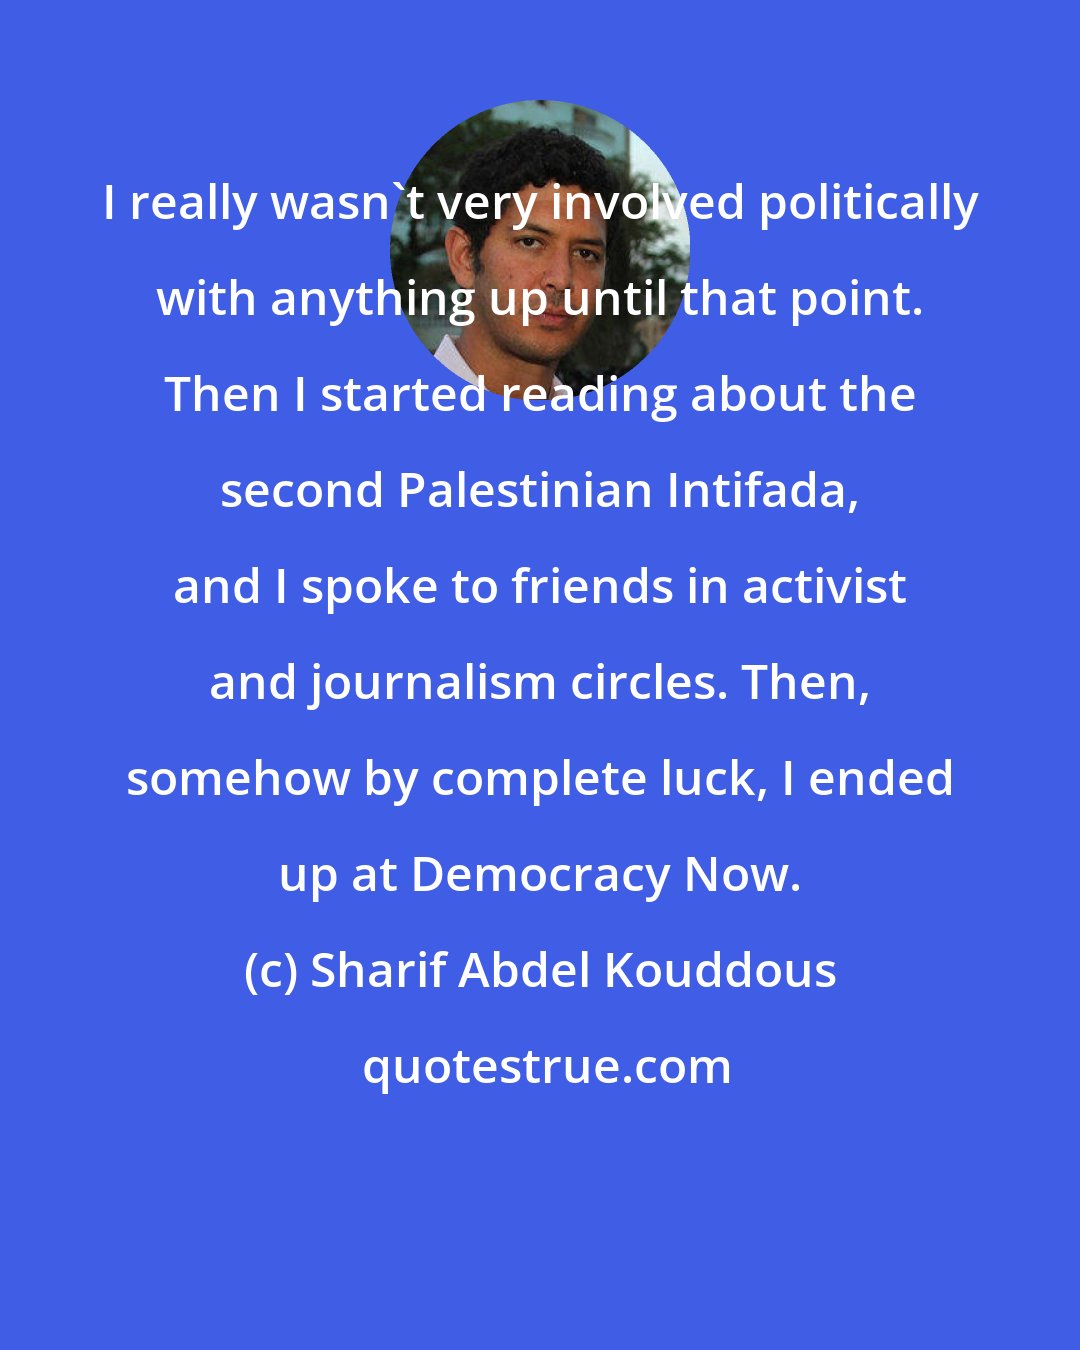 Sharif Abdel Kouddous: I really wasn't very involved politically with anything up until that point. Then I started reading about the second Palestinian Intifada, and I spoke to friends in activist and journalism circles. Then, somehow by complete luck, I ended up at Democracy Now.